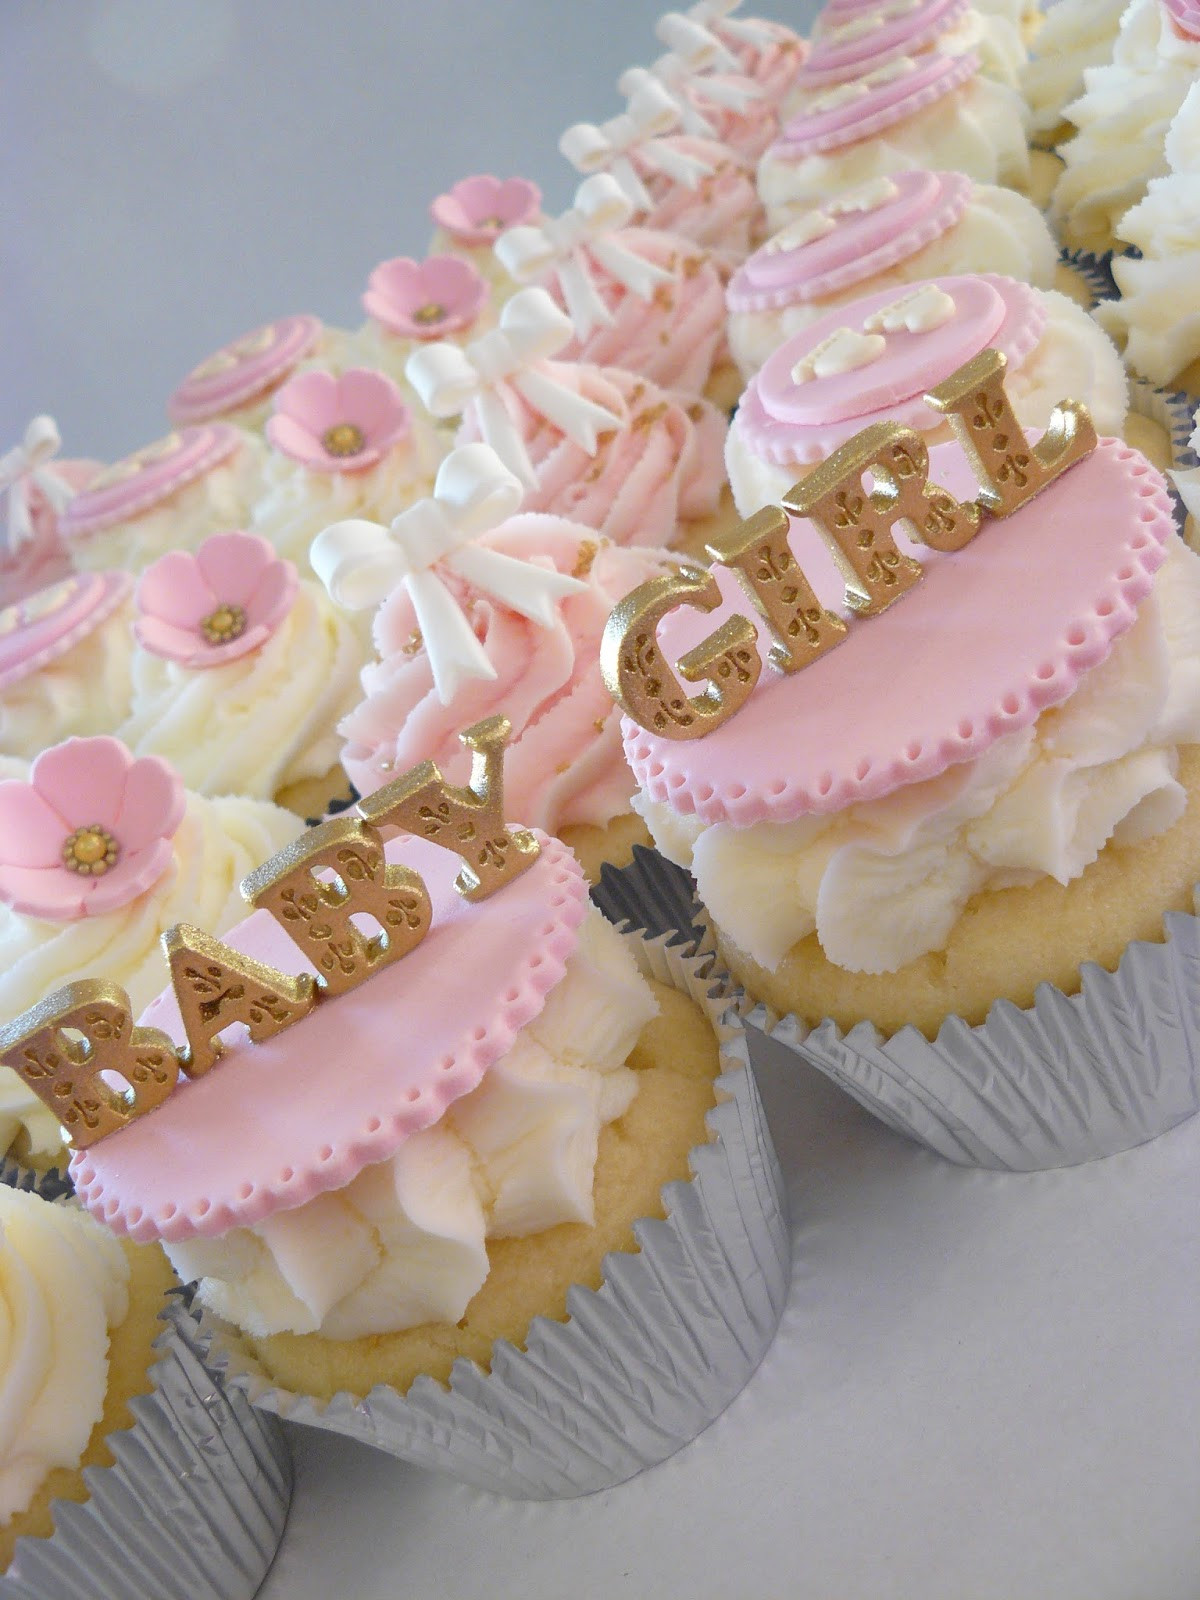 Girl Baby Shower Cupcakes Fresh the Cup Cake Taste Brisbane Cupcakes Girl Baby Shower